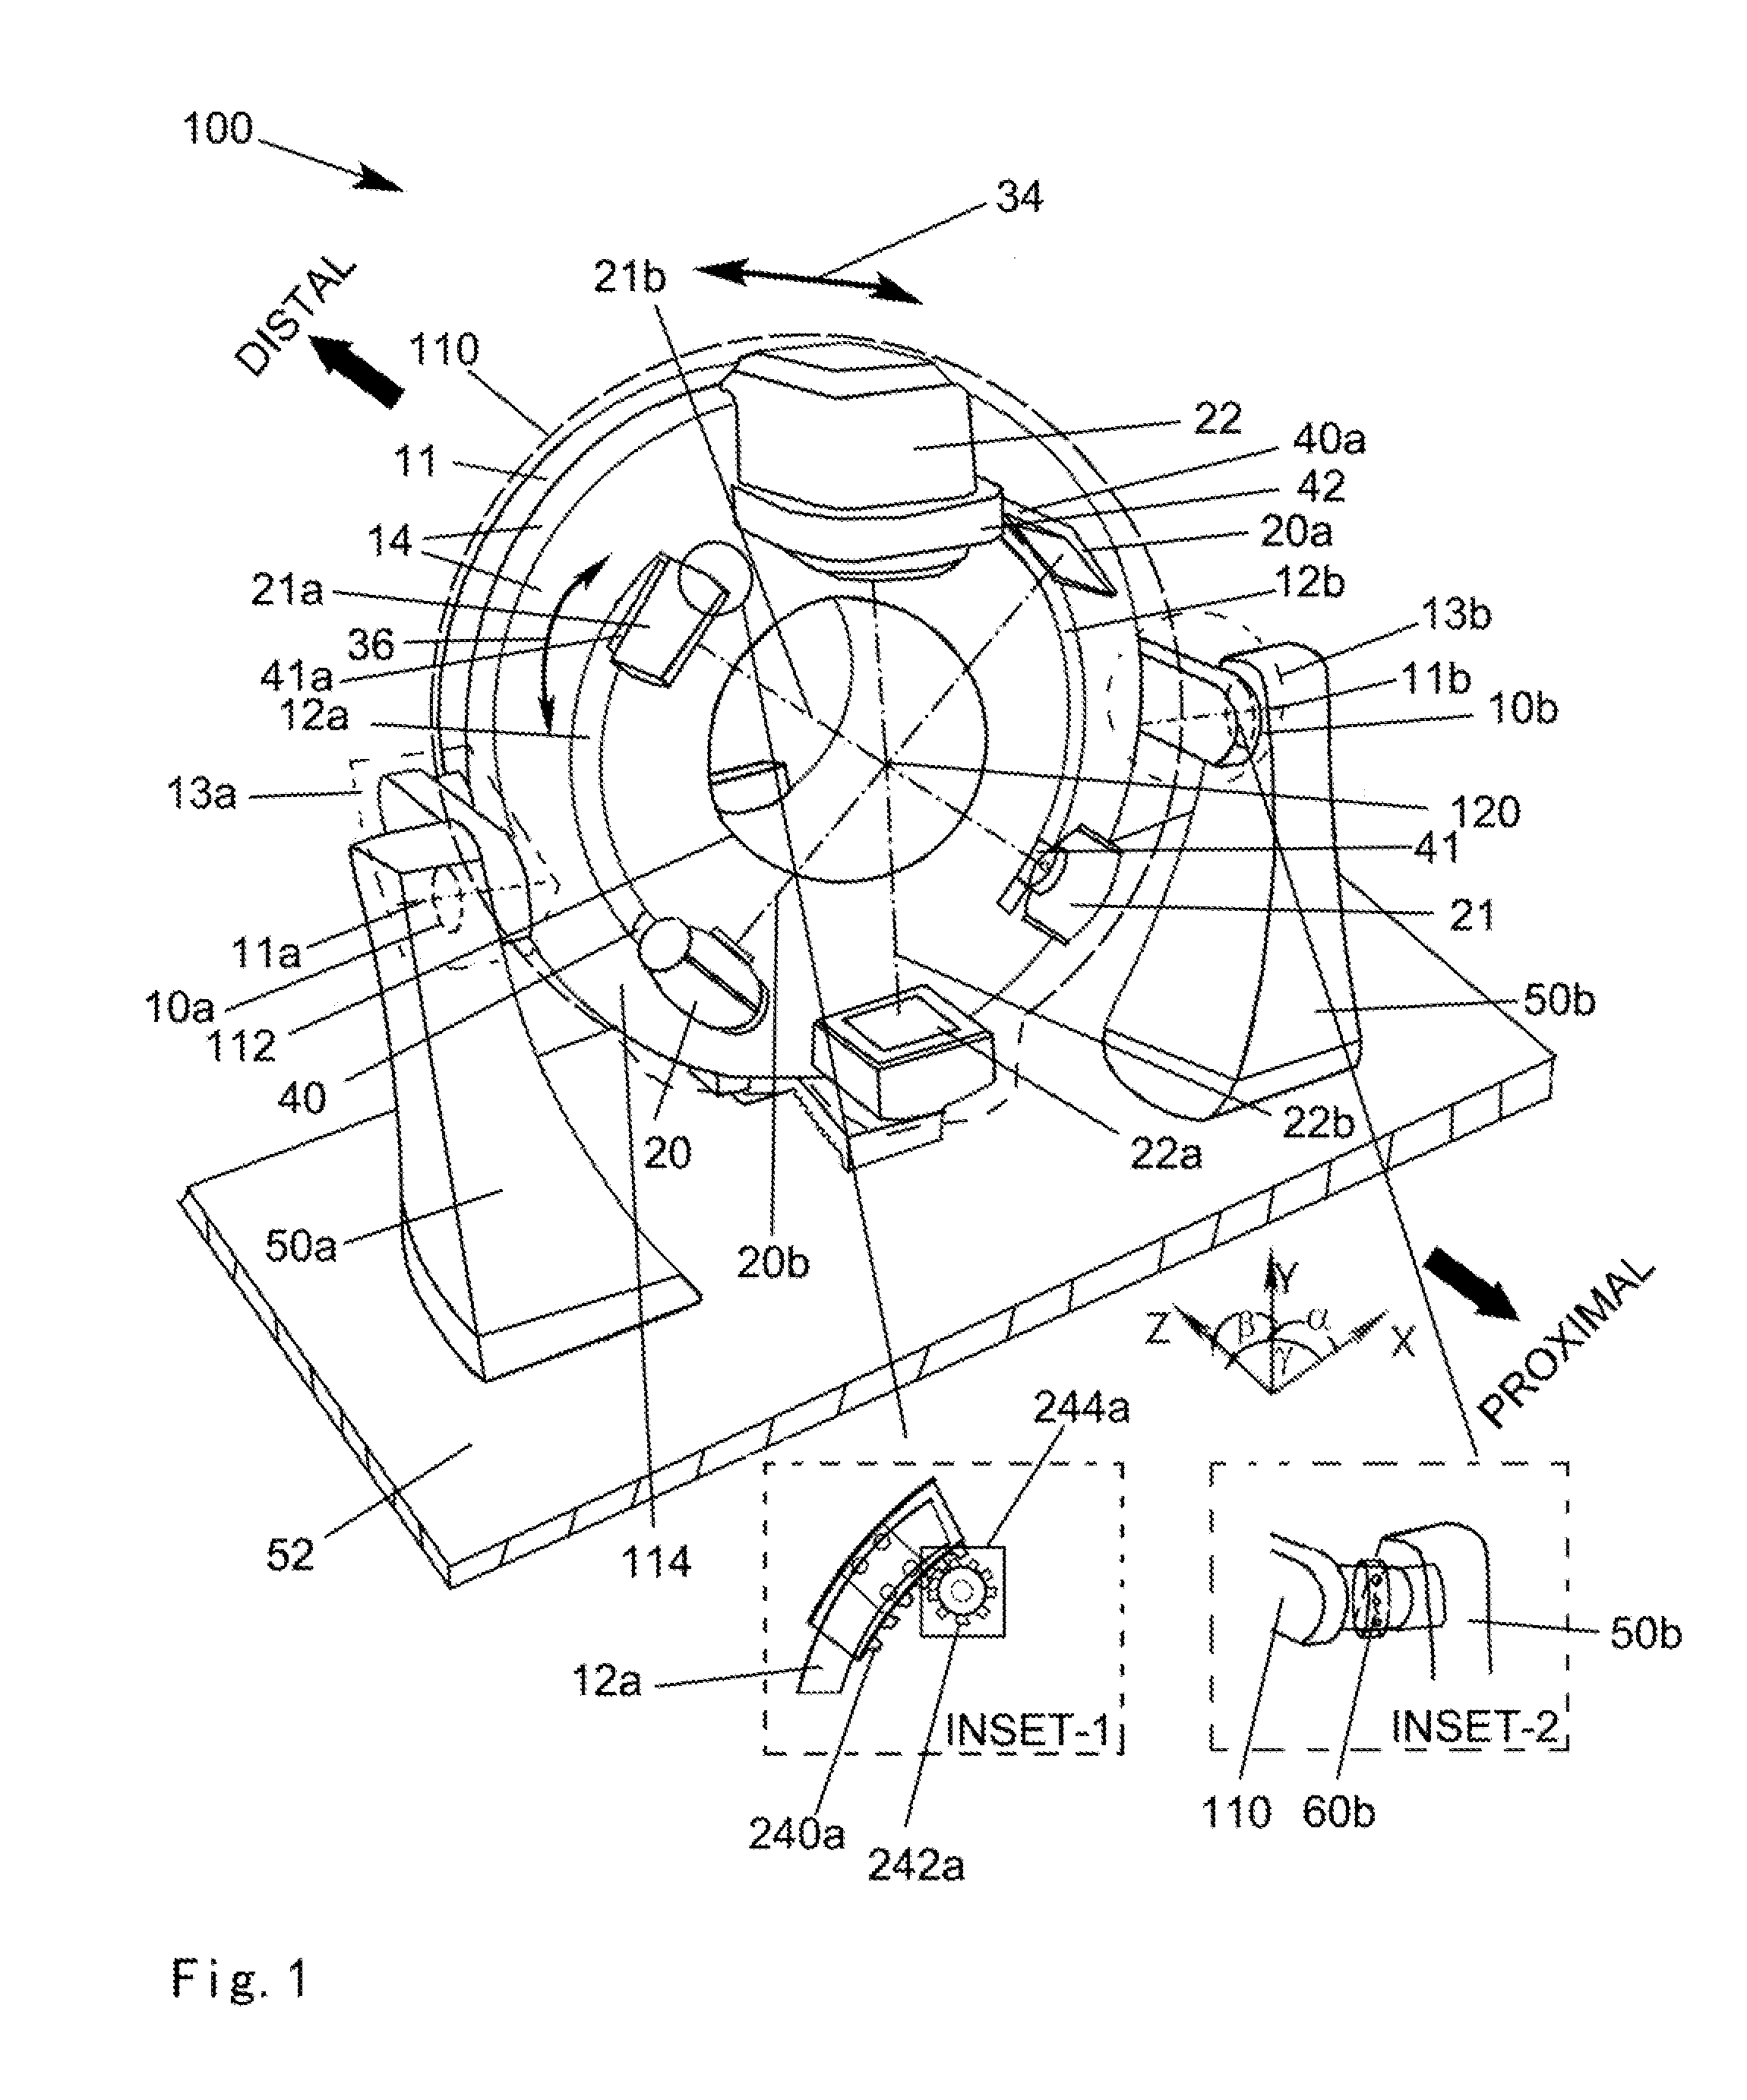 Spherical rotational radiation therapy apparatus